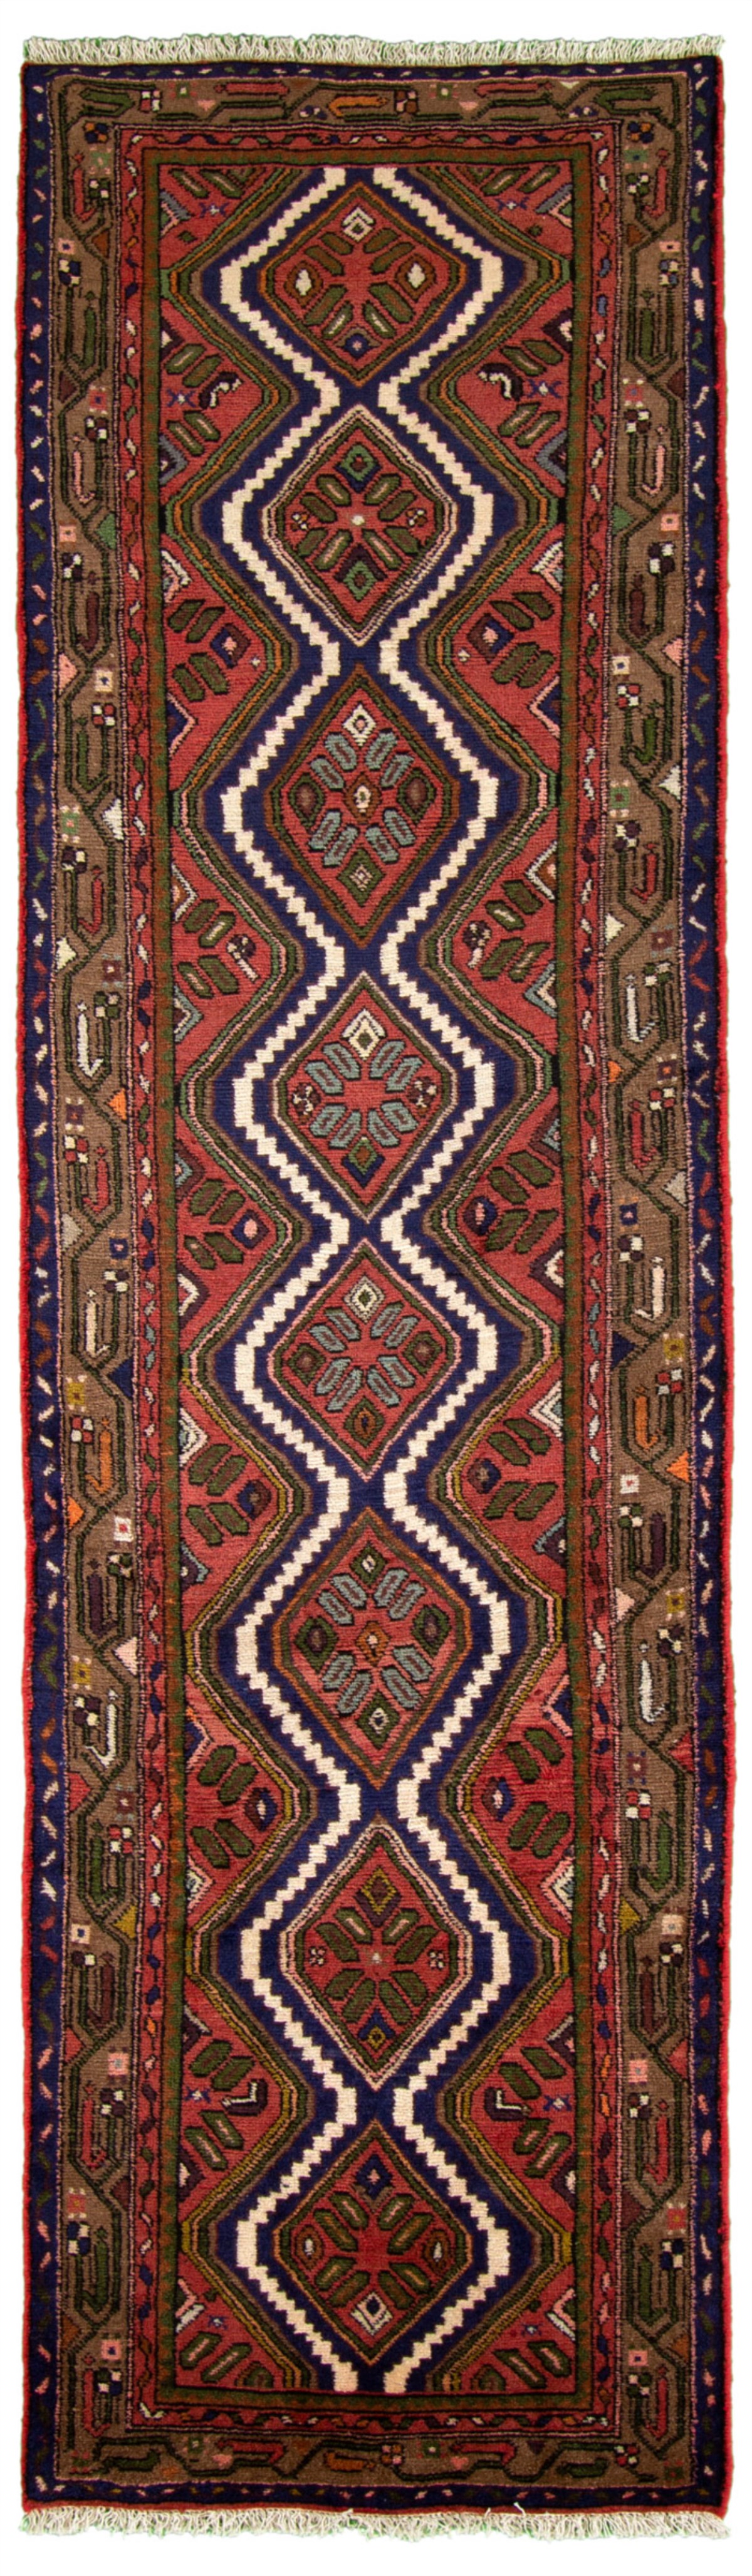 Hand-knotted Koliai Red Wool Rug 2'11" x 10'6" Size: 2'11" x 10'6"  